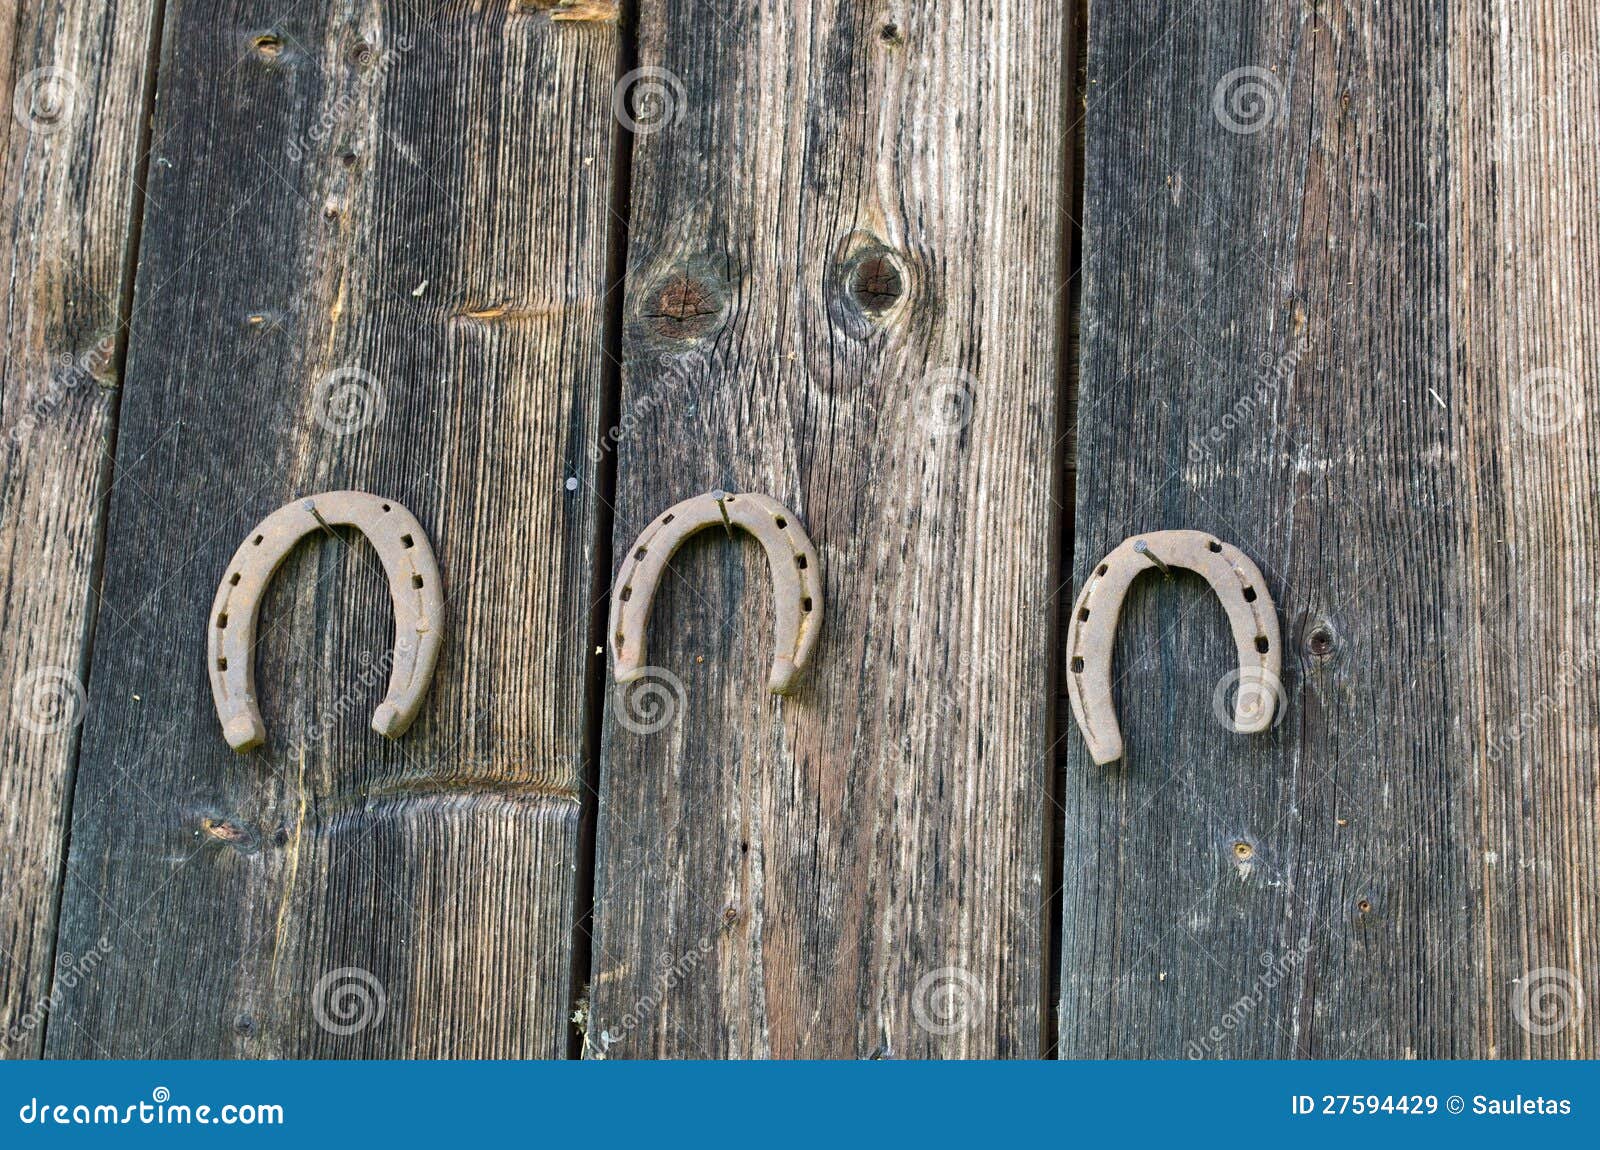 640+ Horseshoe Nail Stock Photos, Pictures & Royalty-Free Images - iStock